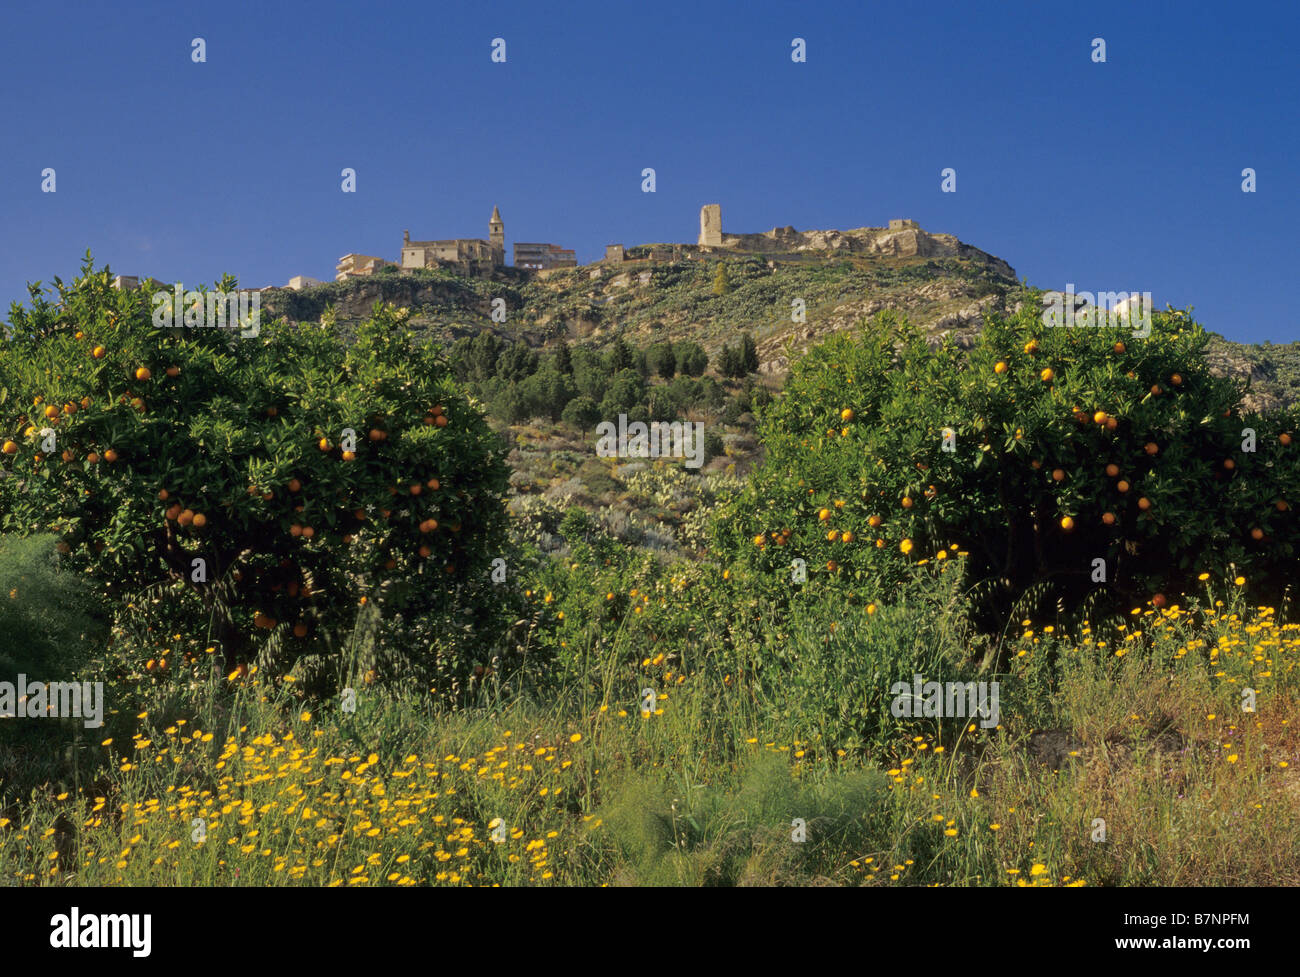 Hill town of Agira and orange trees Sicily Italy Stock Photo